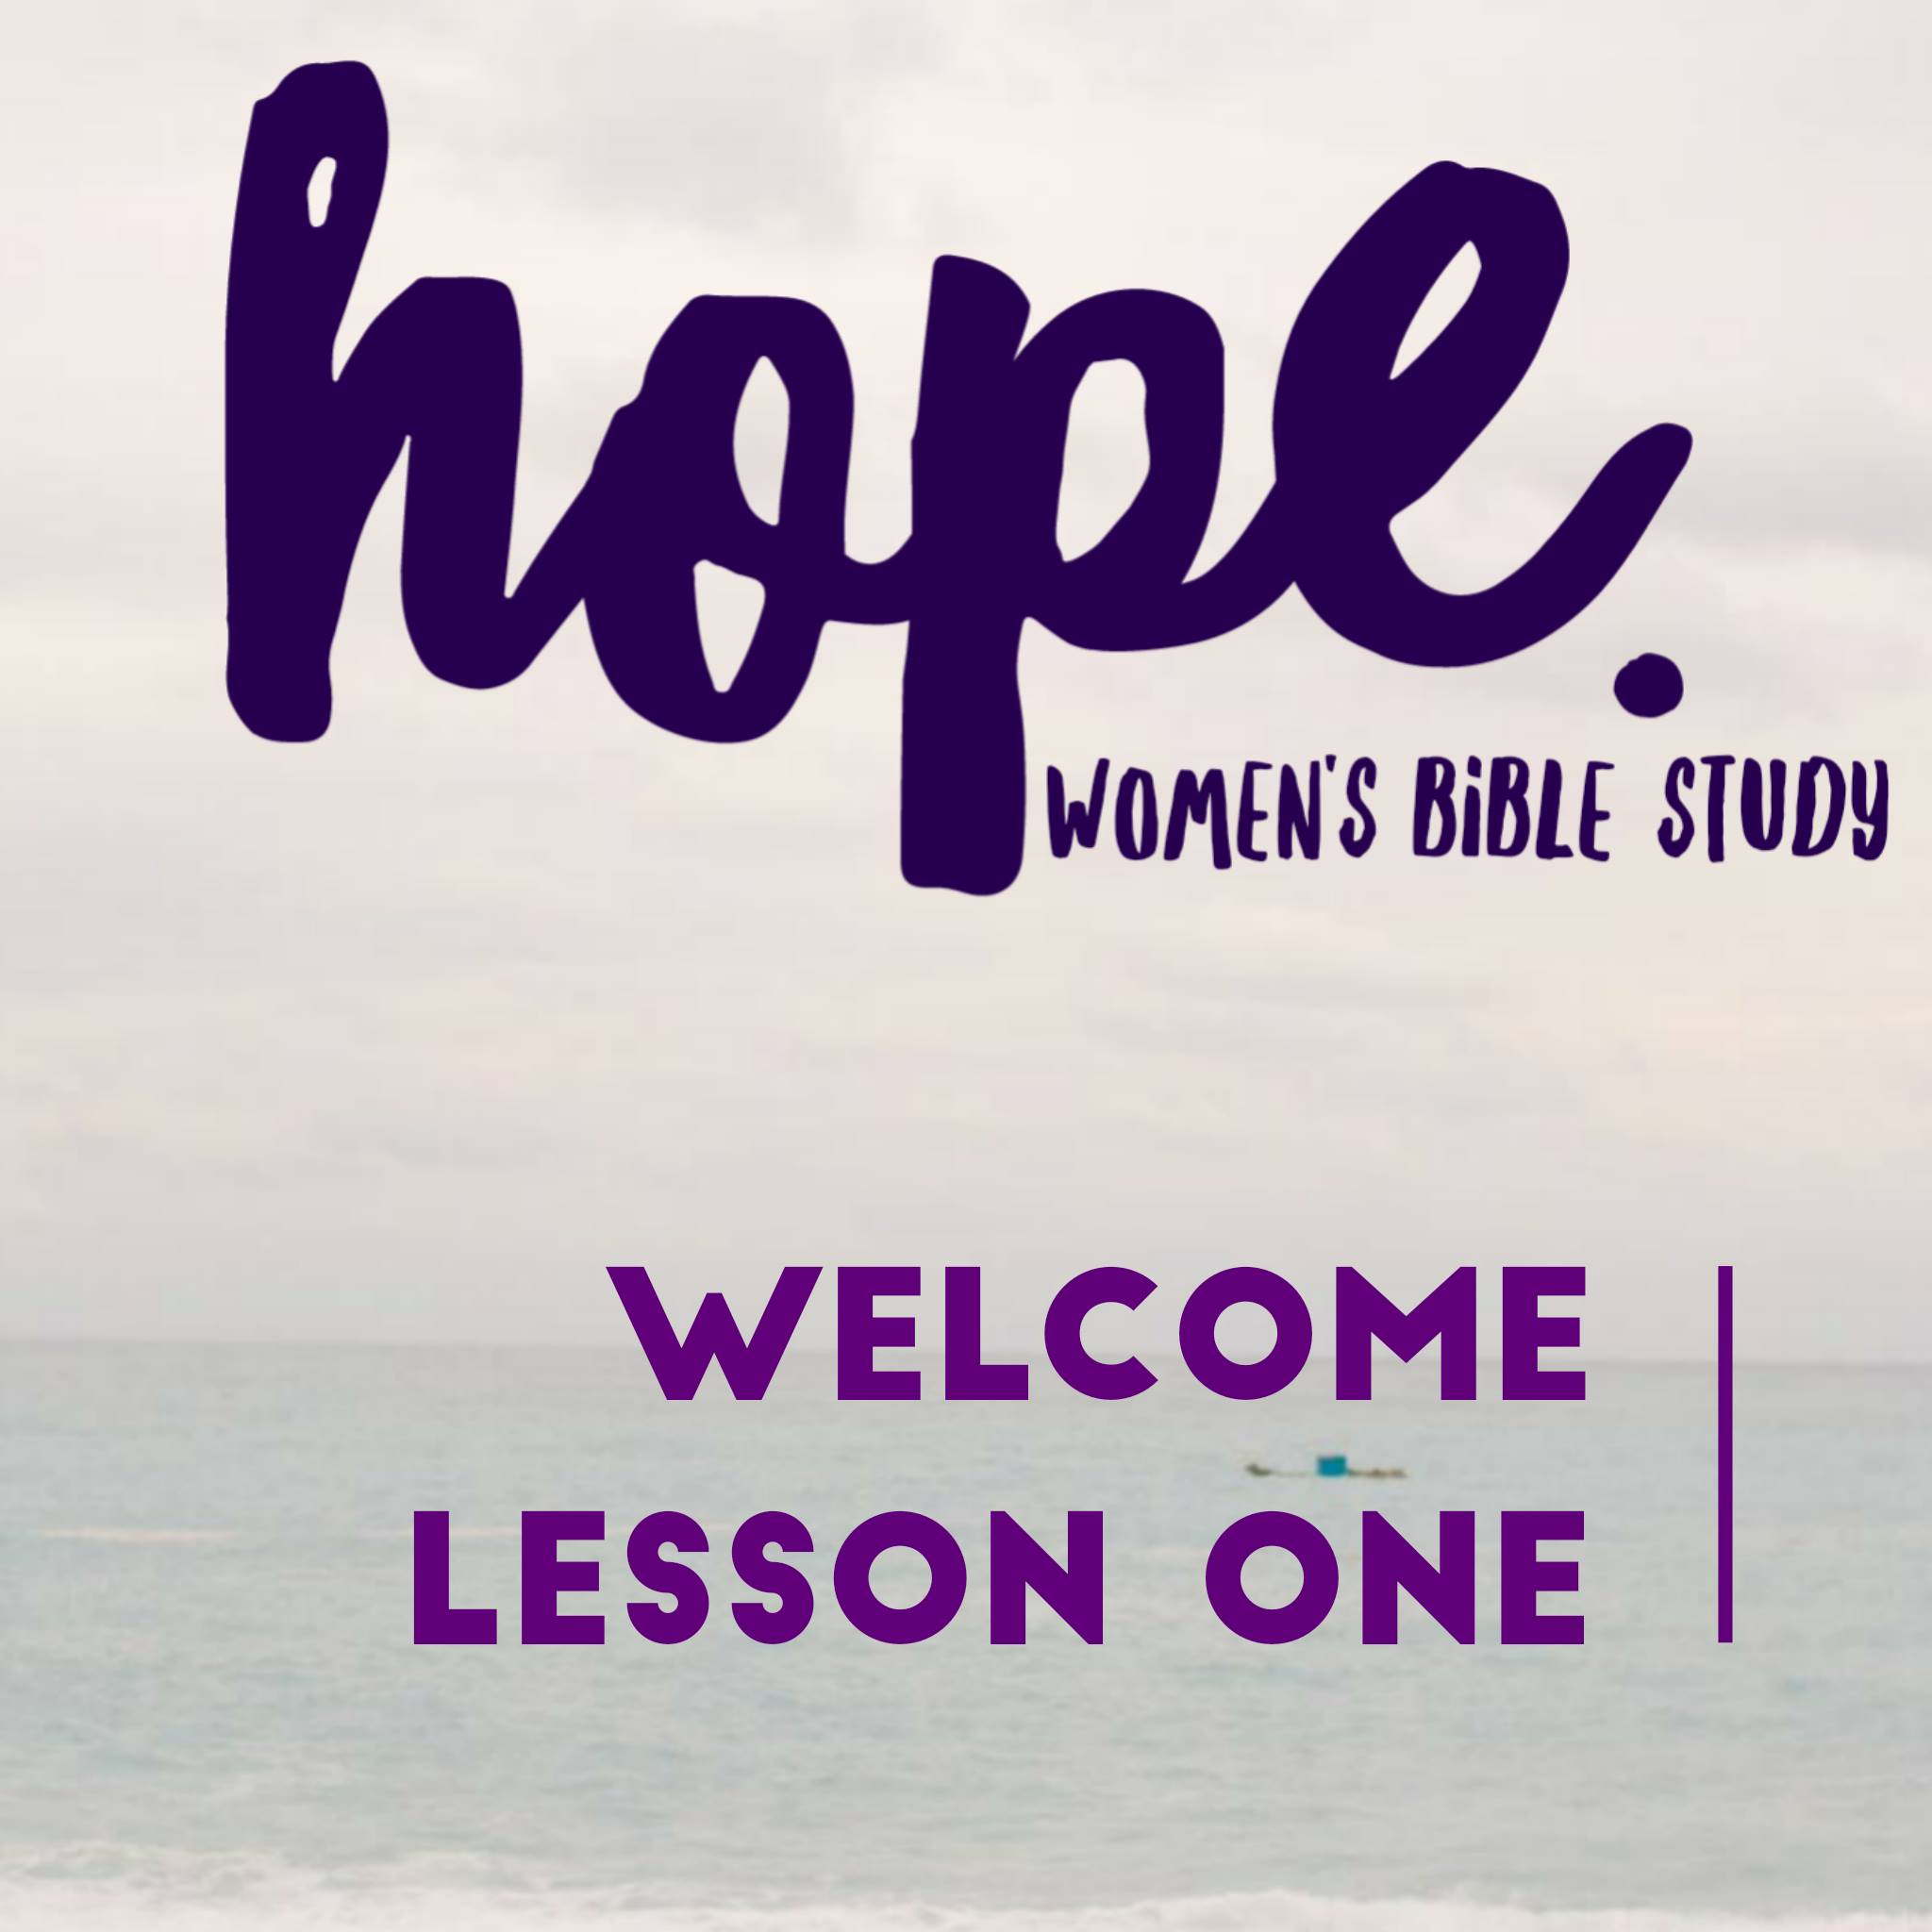 1.0 Hope Study Welcome & Lesson One